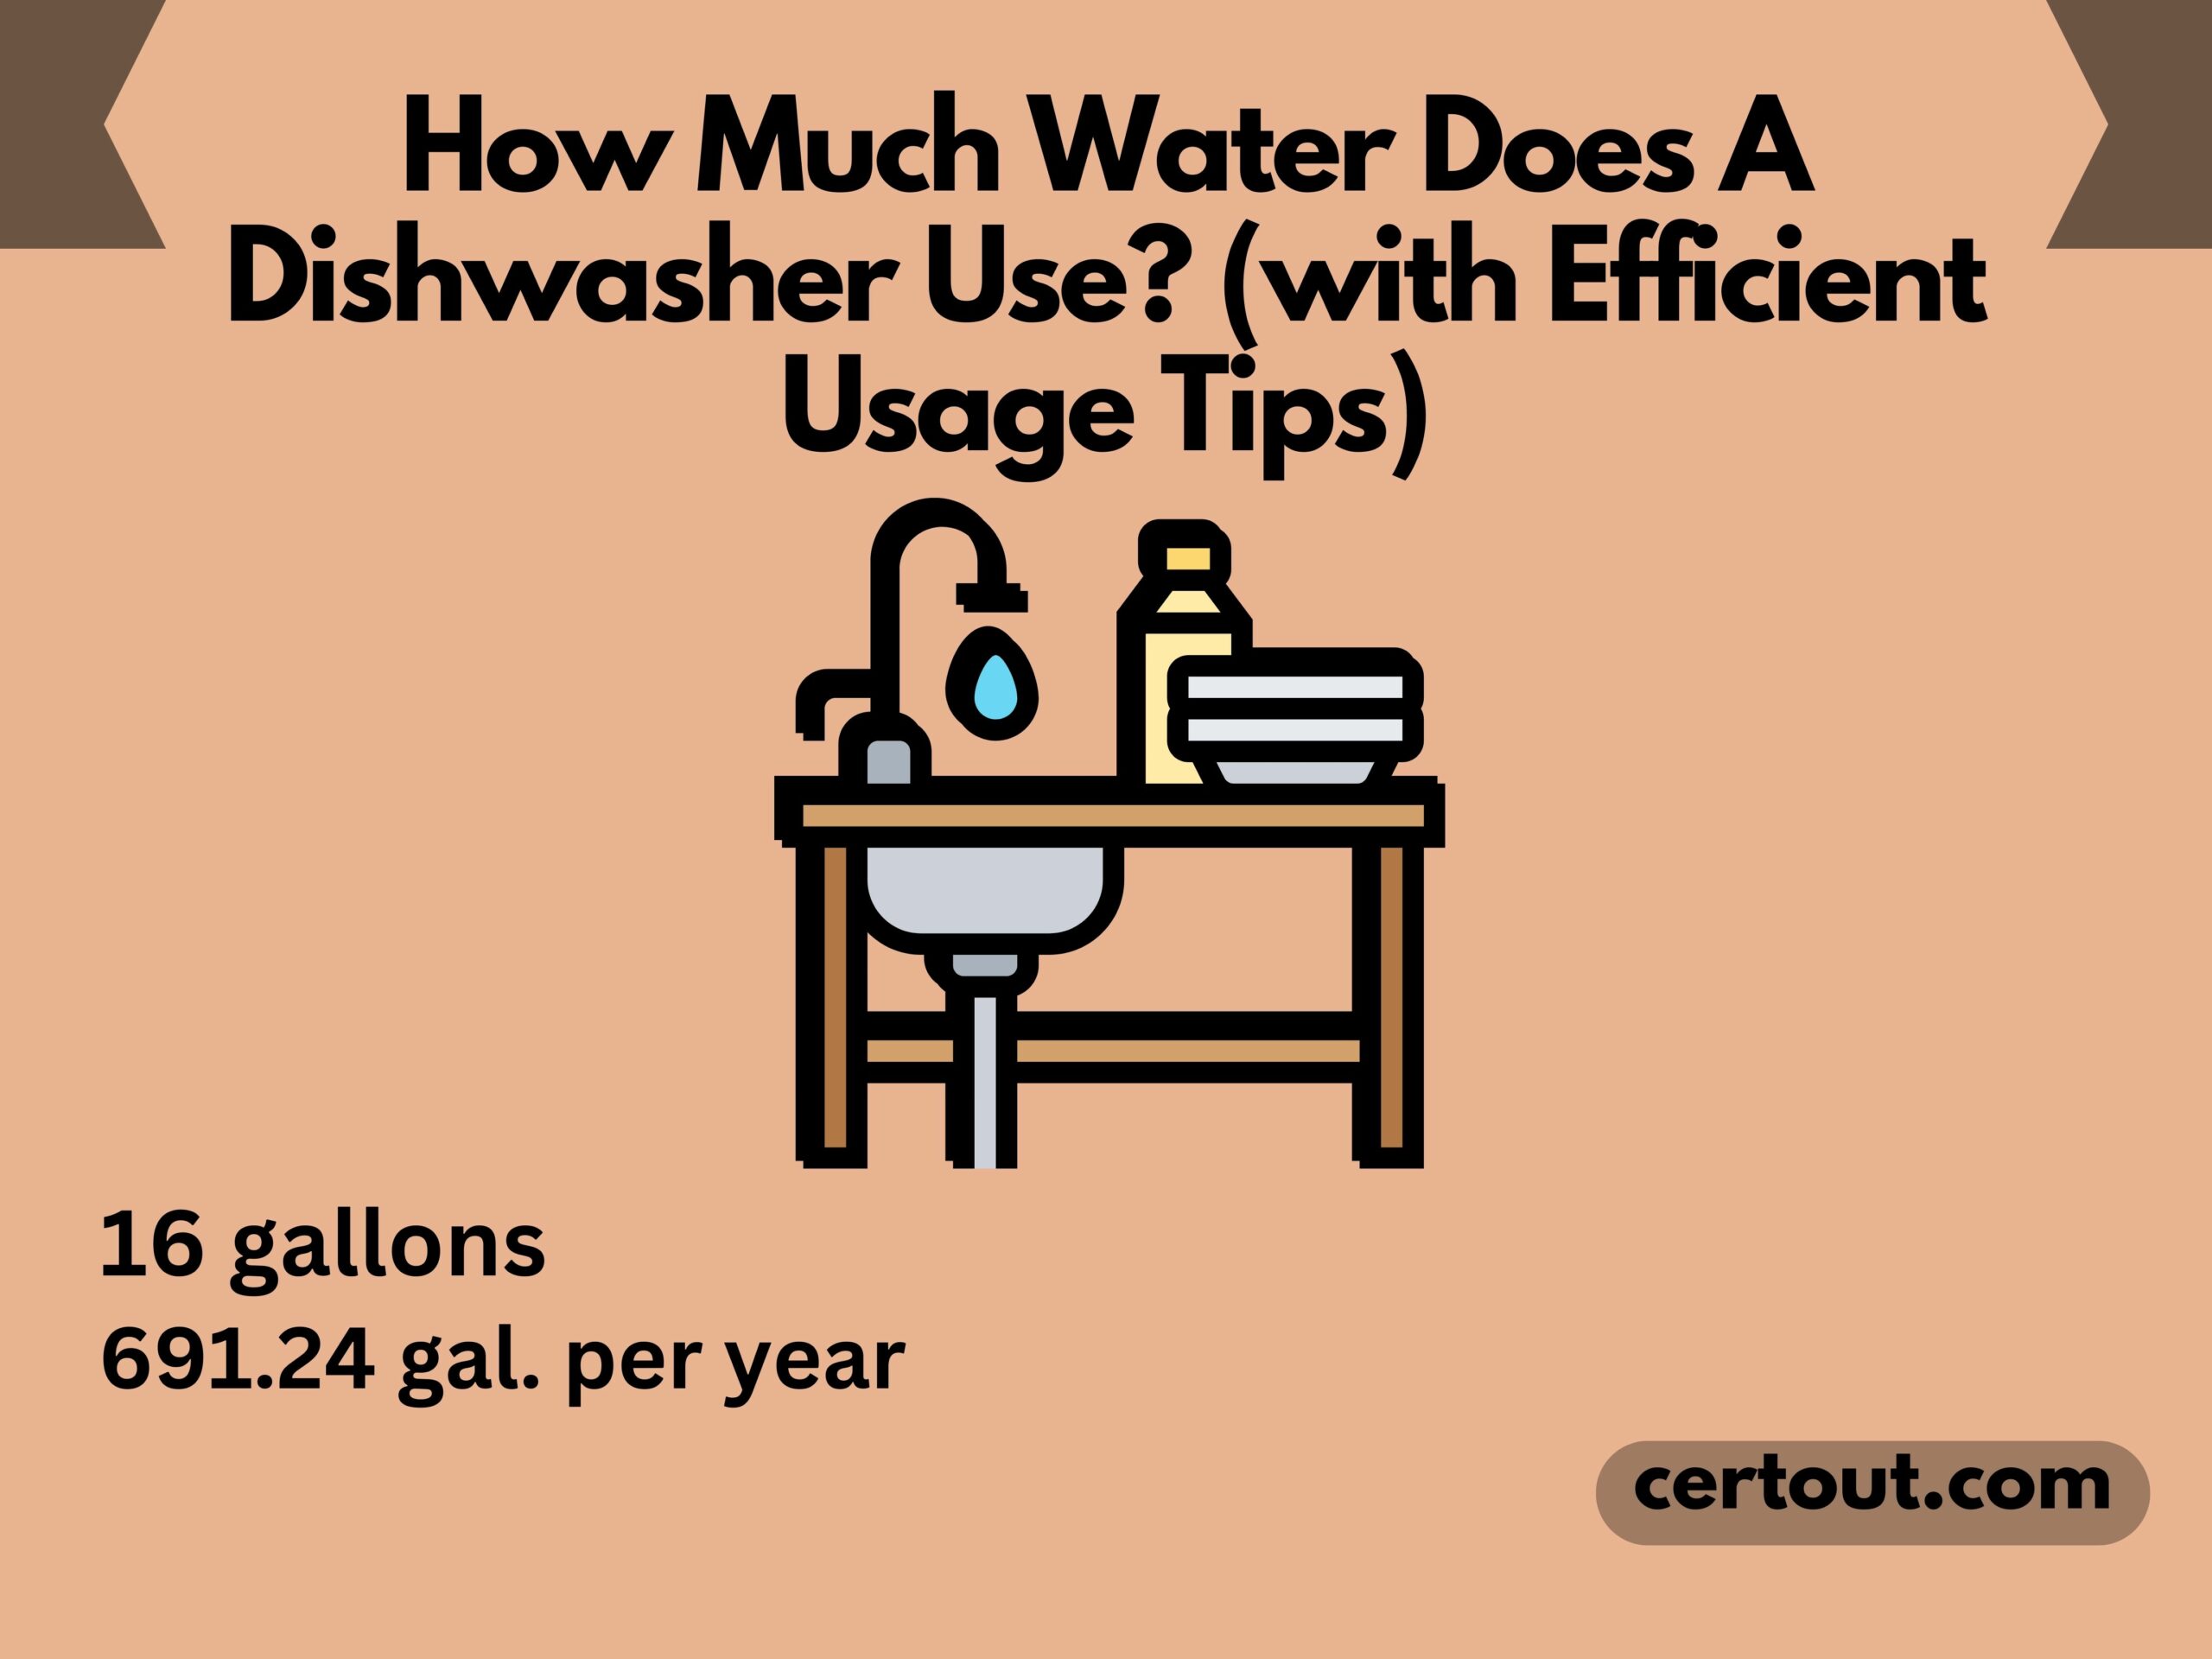 water does a dishwasher use